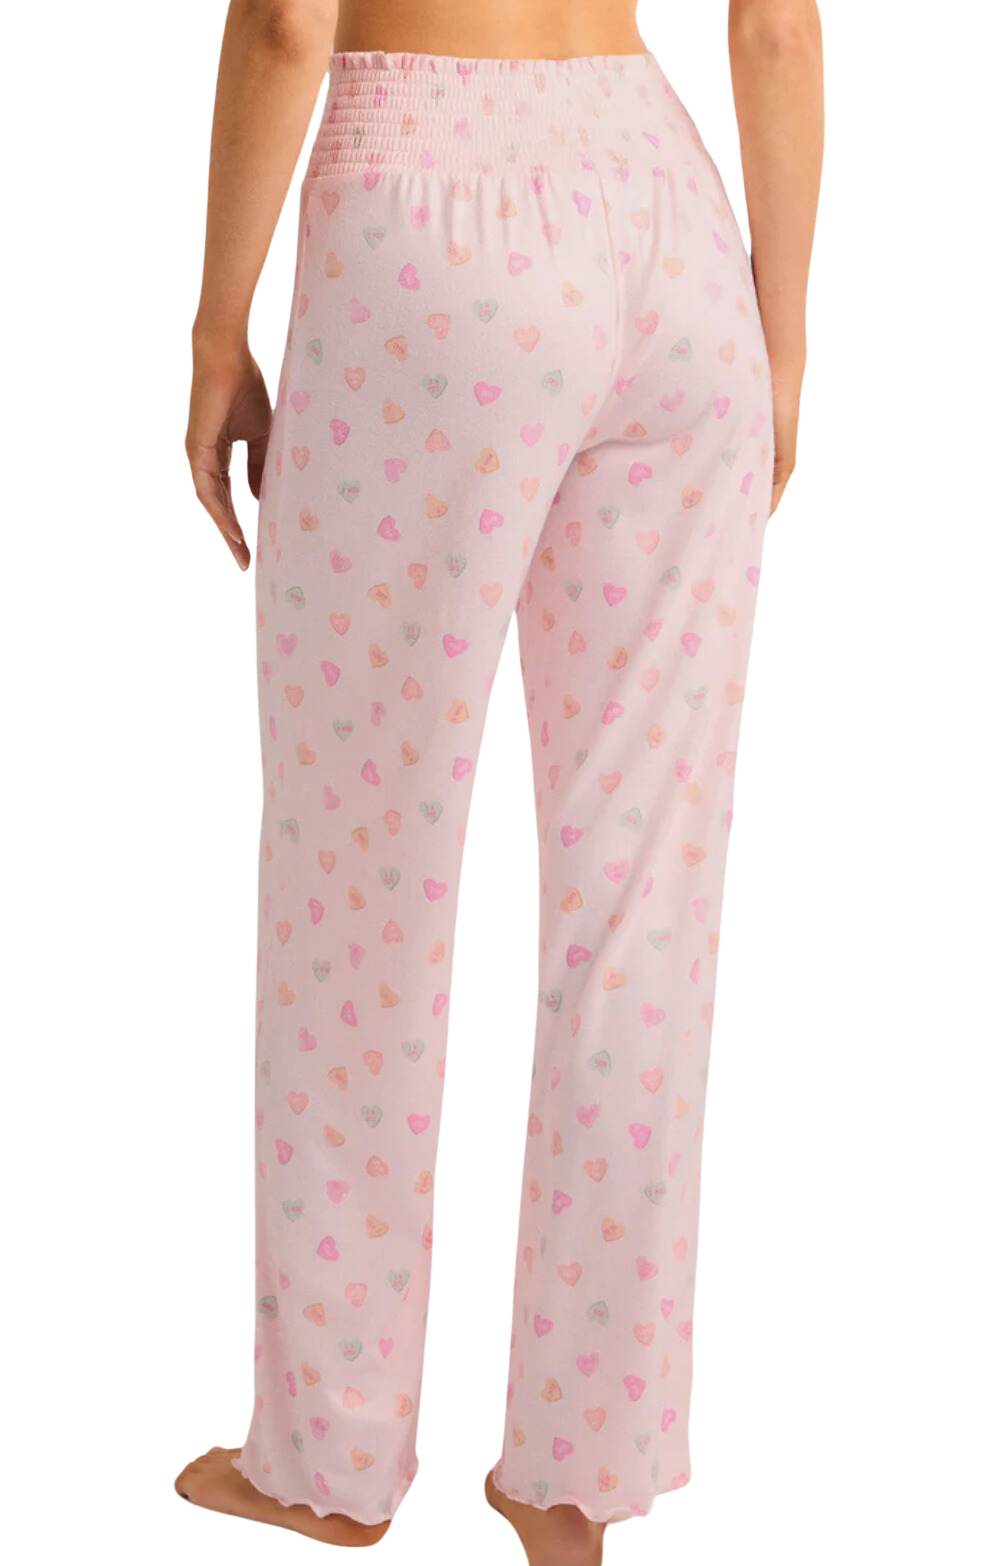 Dawn candy hearts pant